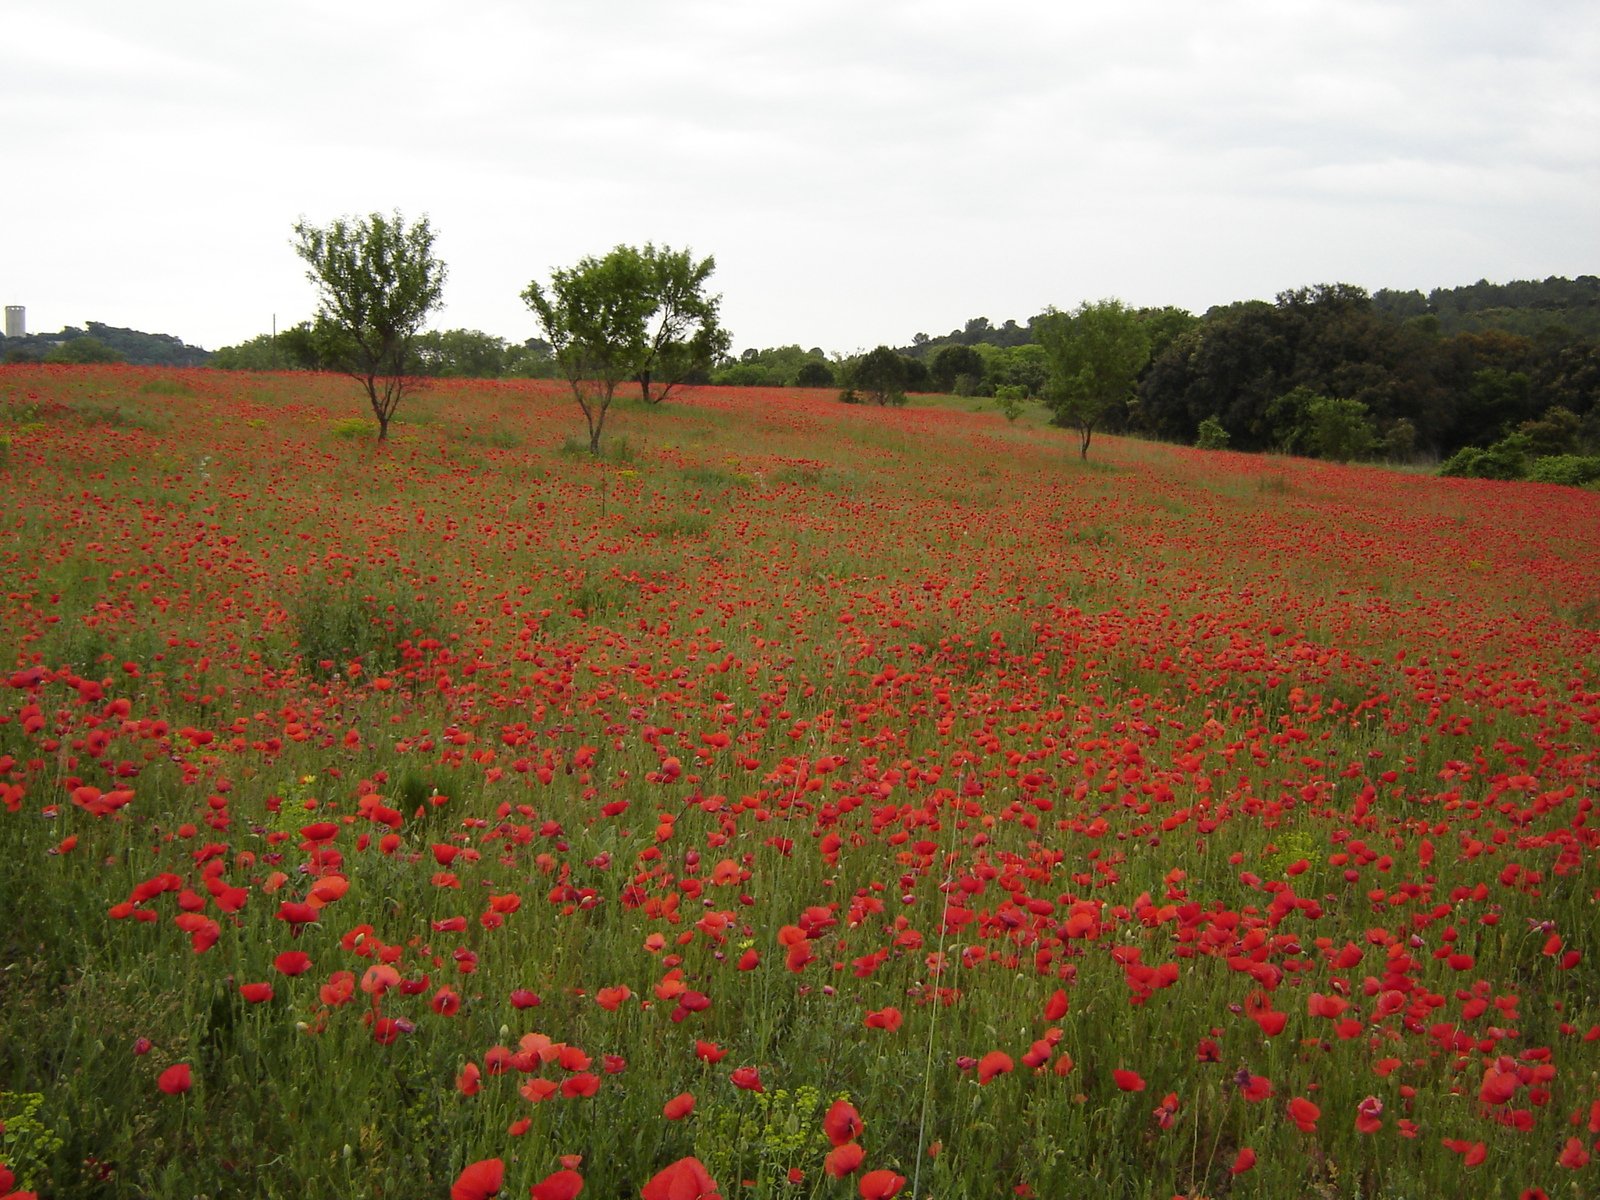 a big field full of red flowers with some trees in the background